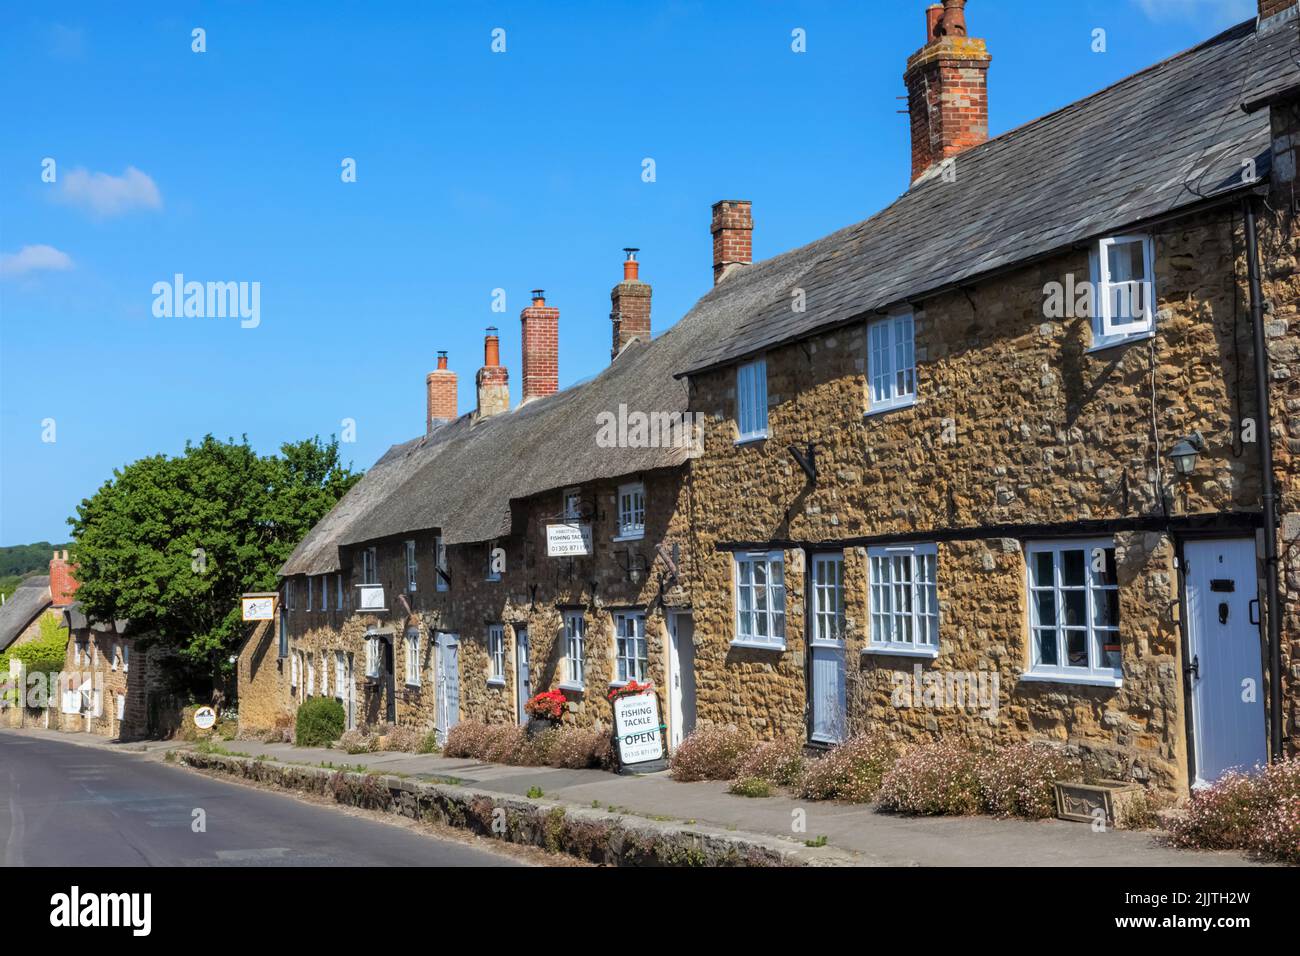 England, Dorset, Abbotsbury, Row of Historic Terraced Cottages and Shops Stock Photo